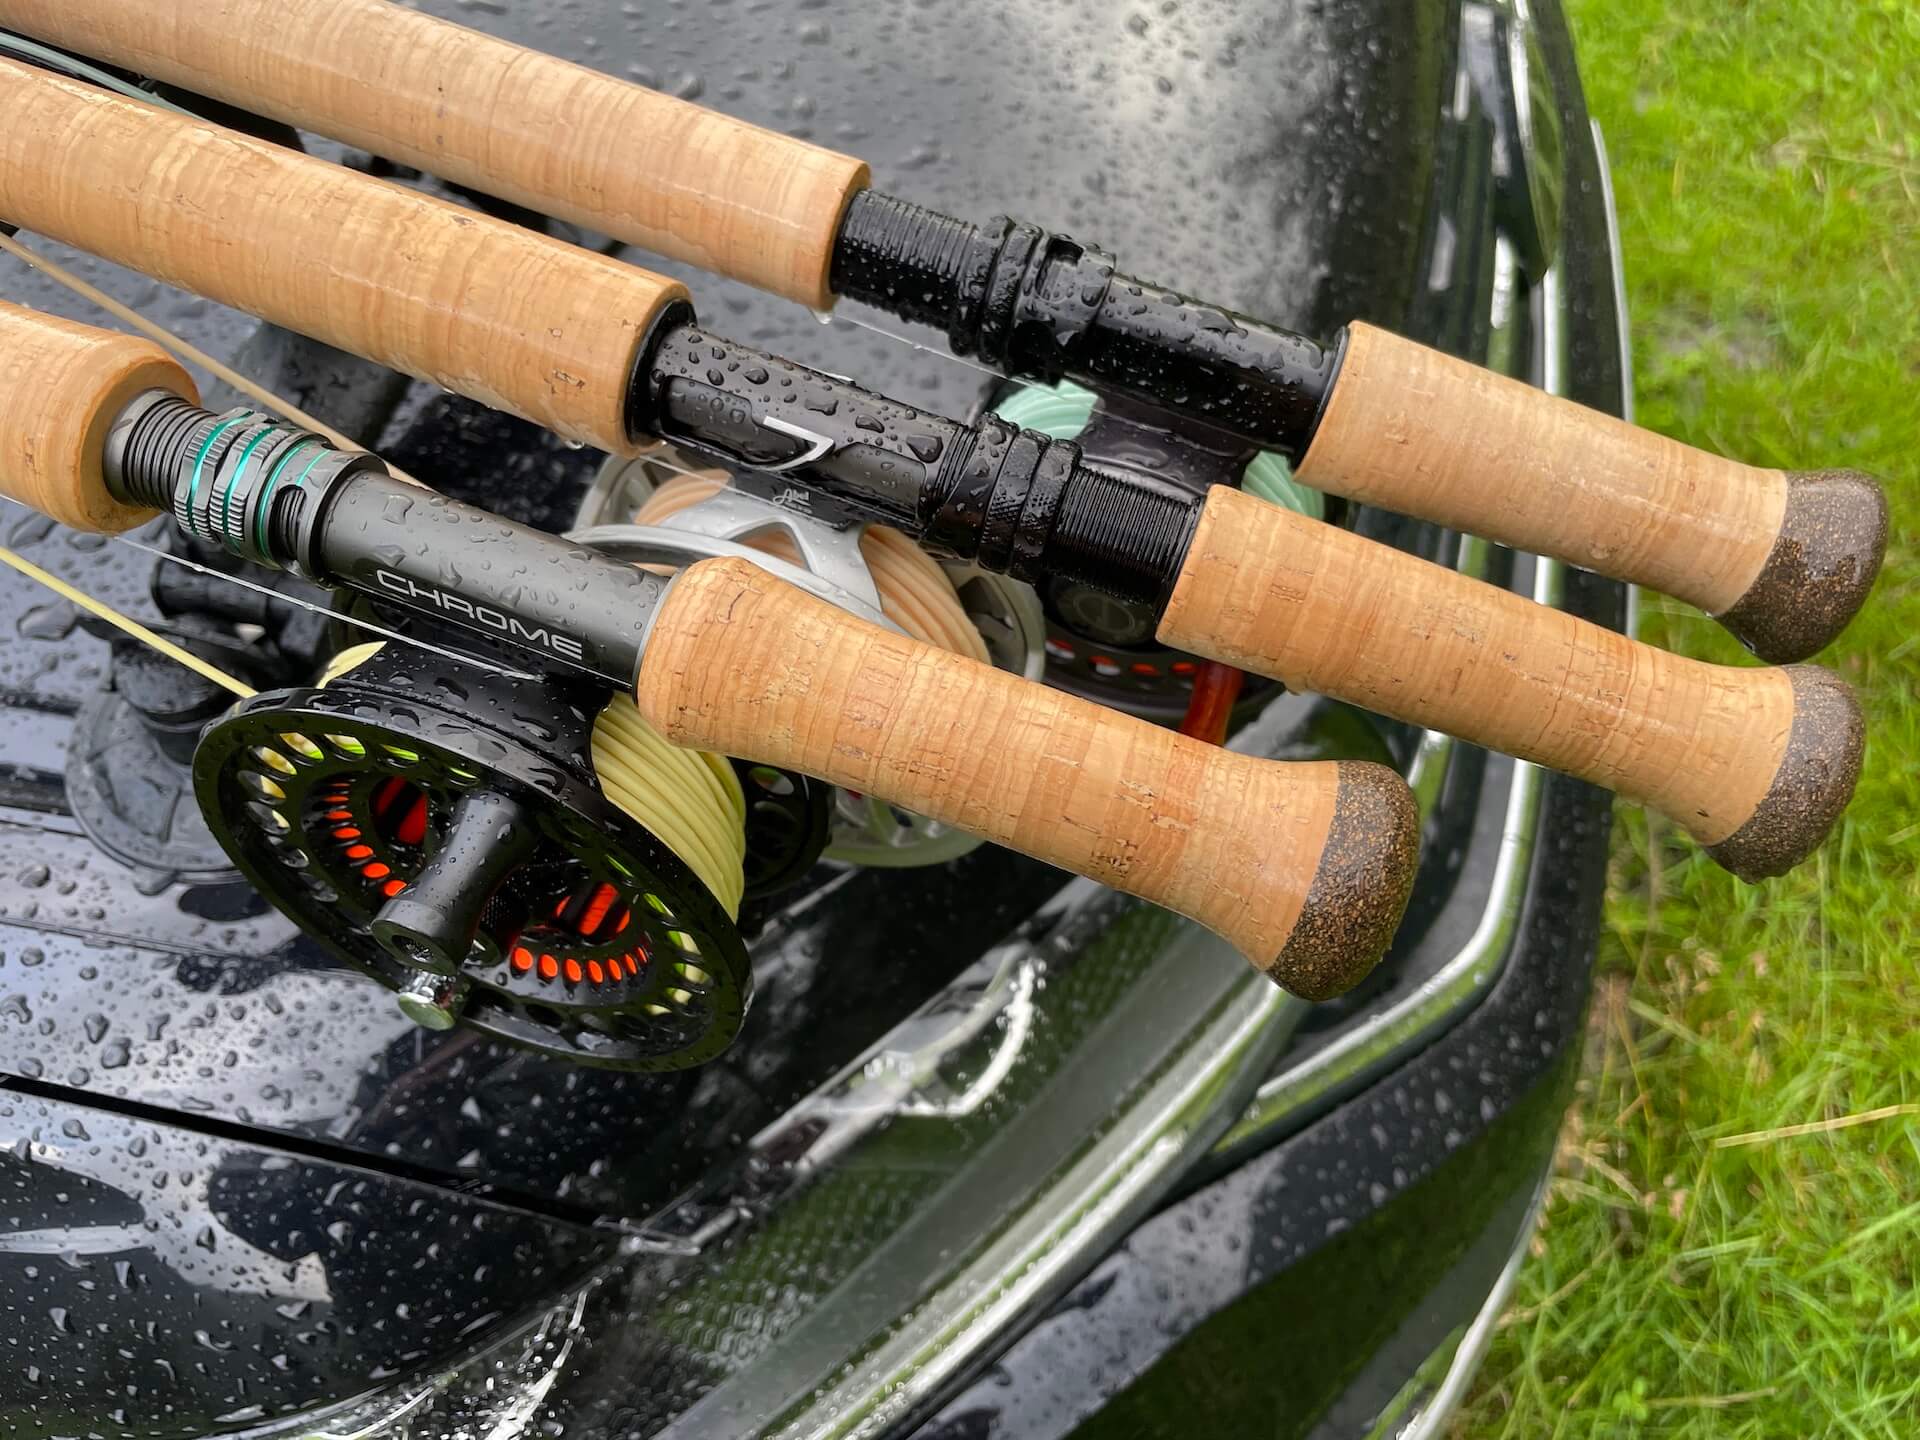 Medium fast Two-handed fly fishing rod spey and switch fly rod with cordura tube 